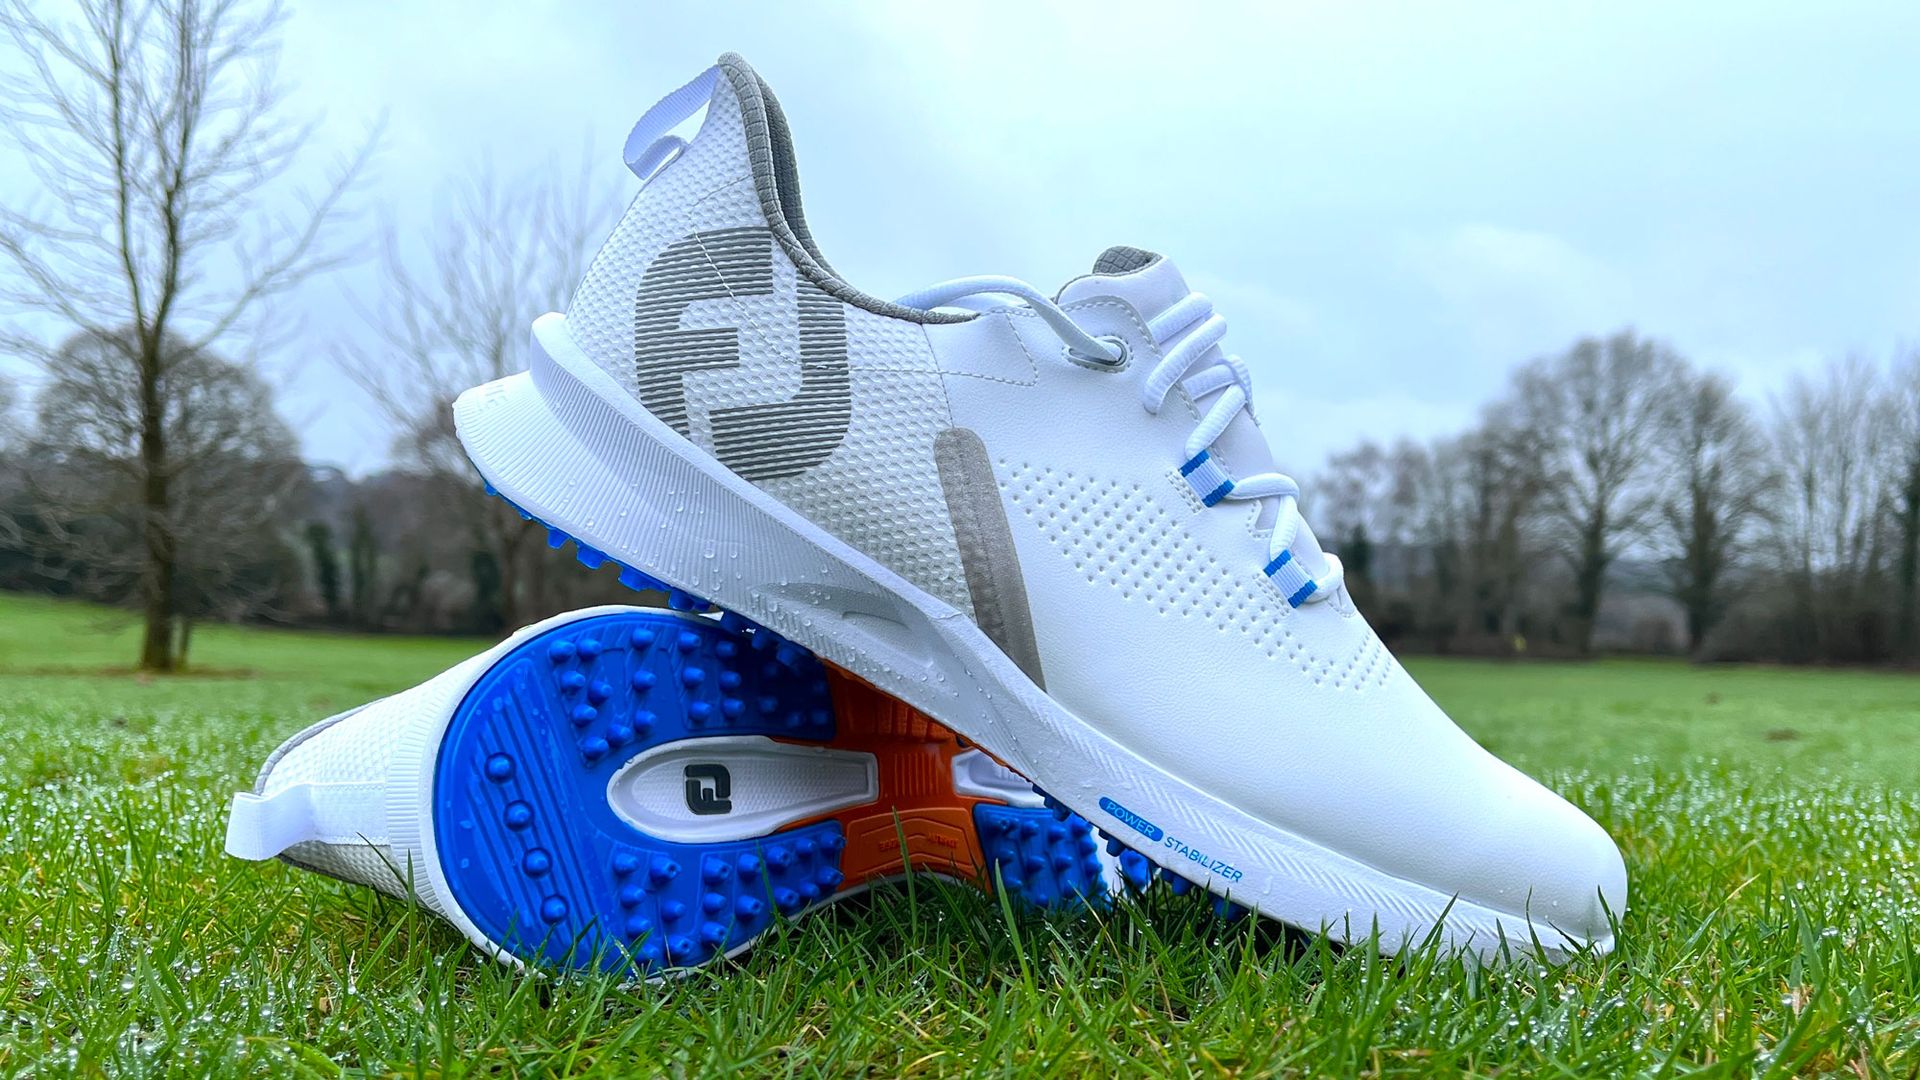 One Of Our Favourite FootJoy Golf Shoes For Less Than $100? Sign Me Up!